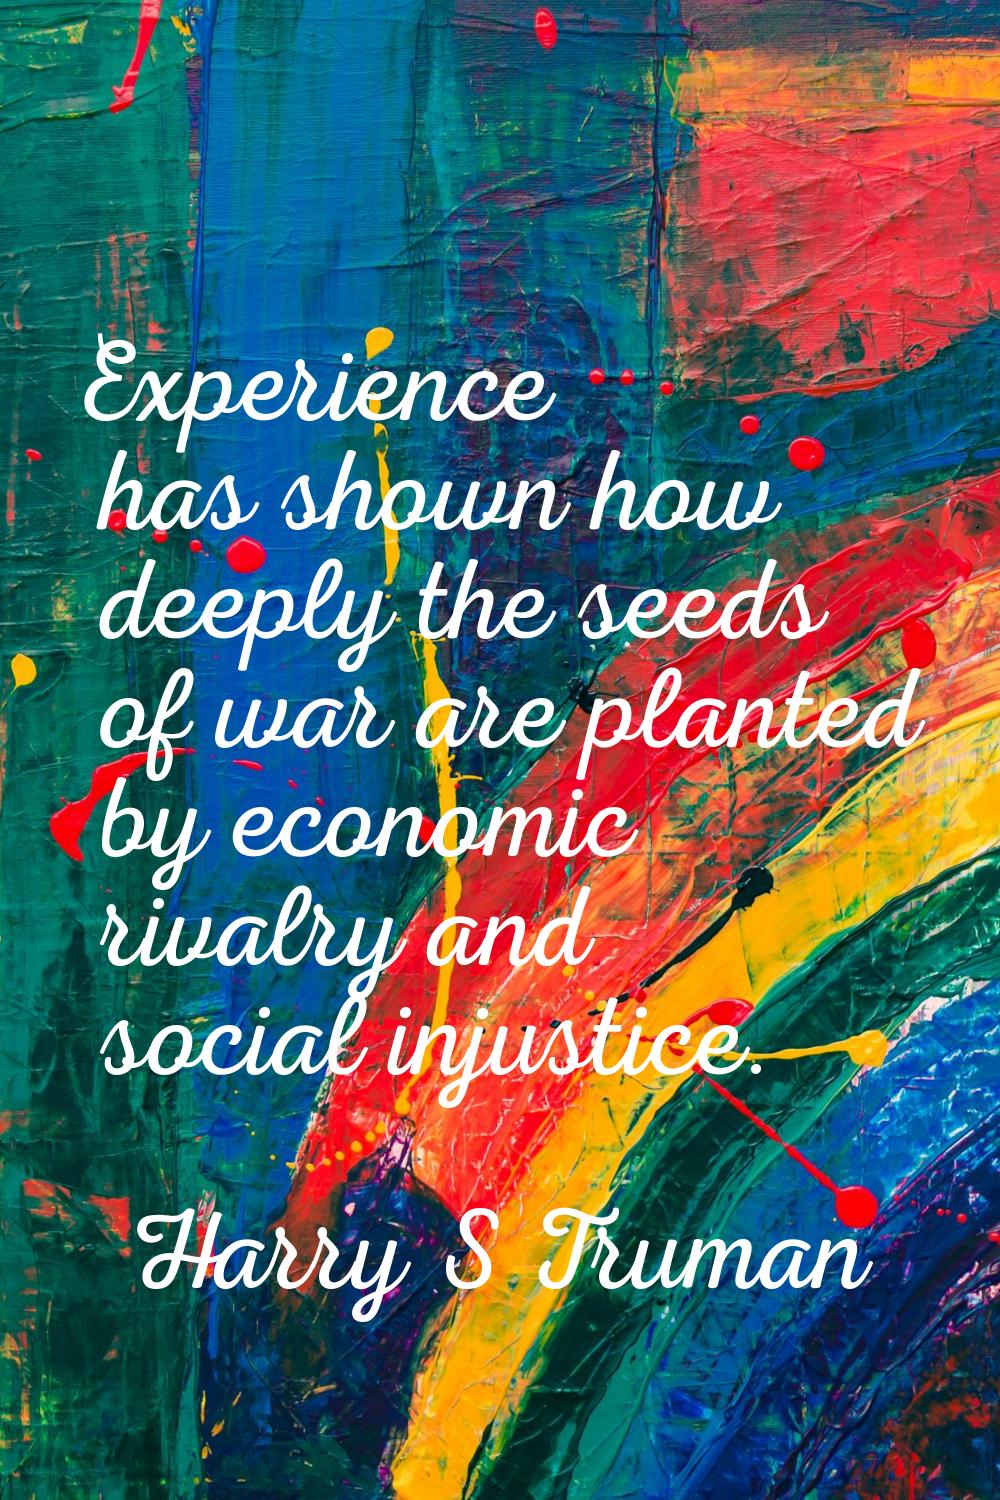 Experience has shown how deeply the seeds of war are planted by economic rivalry and social injusti